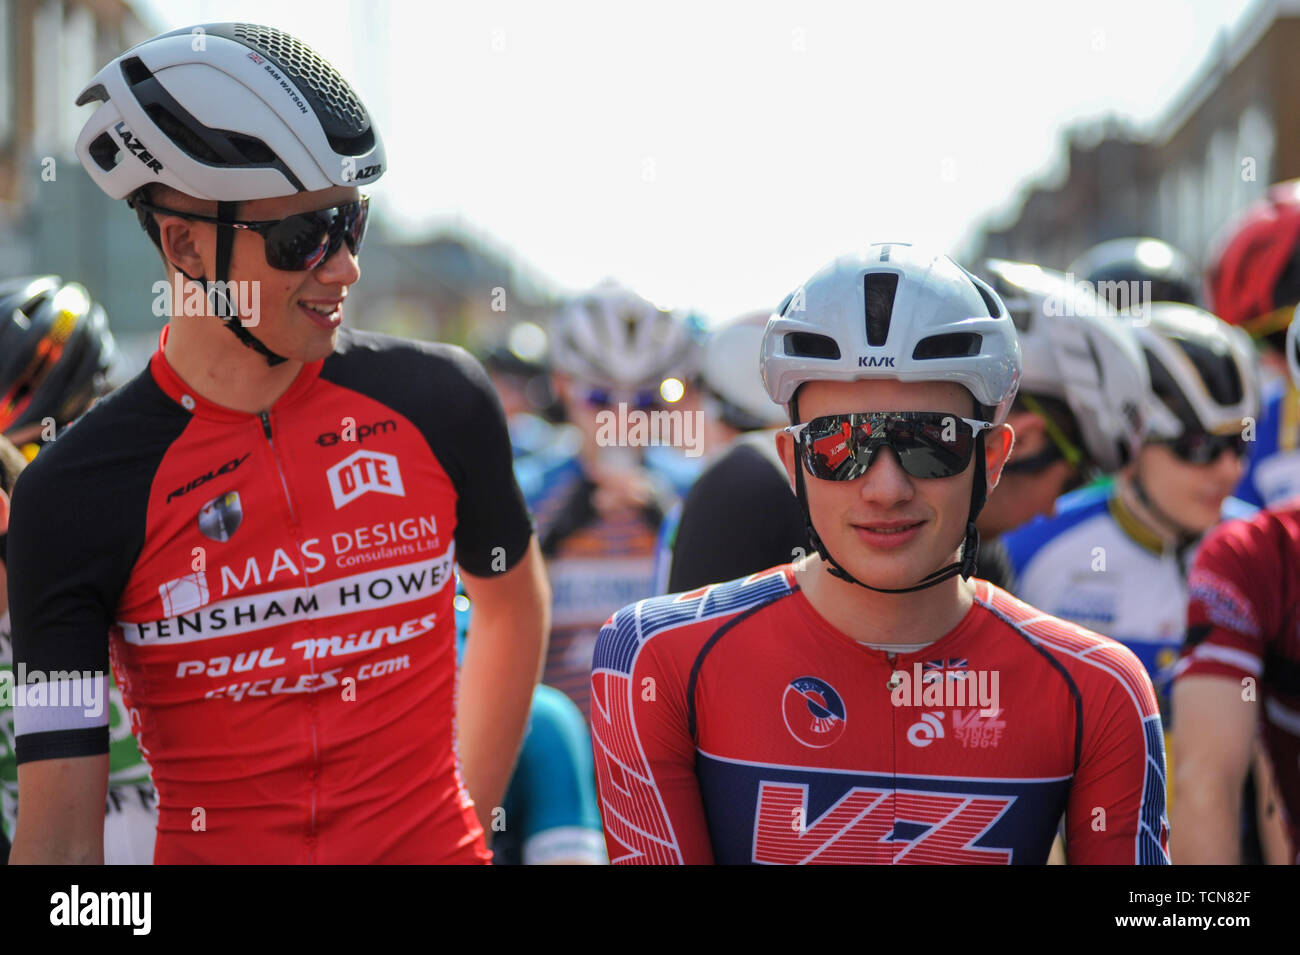 Melton Mowbray, Leicestershire, UK,  9th June 2019. Samuel Watson, Fensham Howes - MAS Design and Leo Hayter, VC Londres on the start line of the 2019 6th Junior CiCLE Classic Cycle Race in Melton Mowbray part of the British Cycling National Junior Road Race Series. @ Credit: David Partridge/Alamy Live News Stock Photo